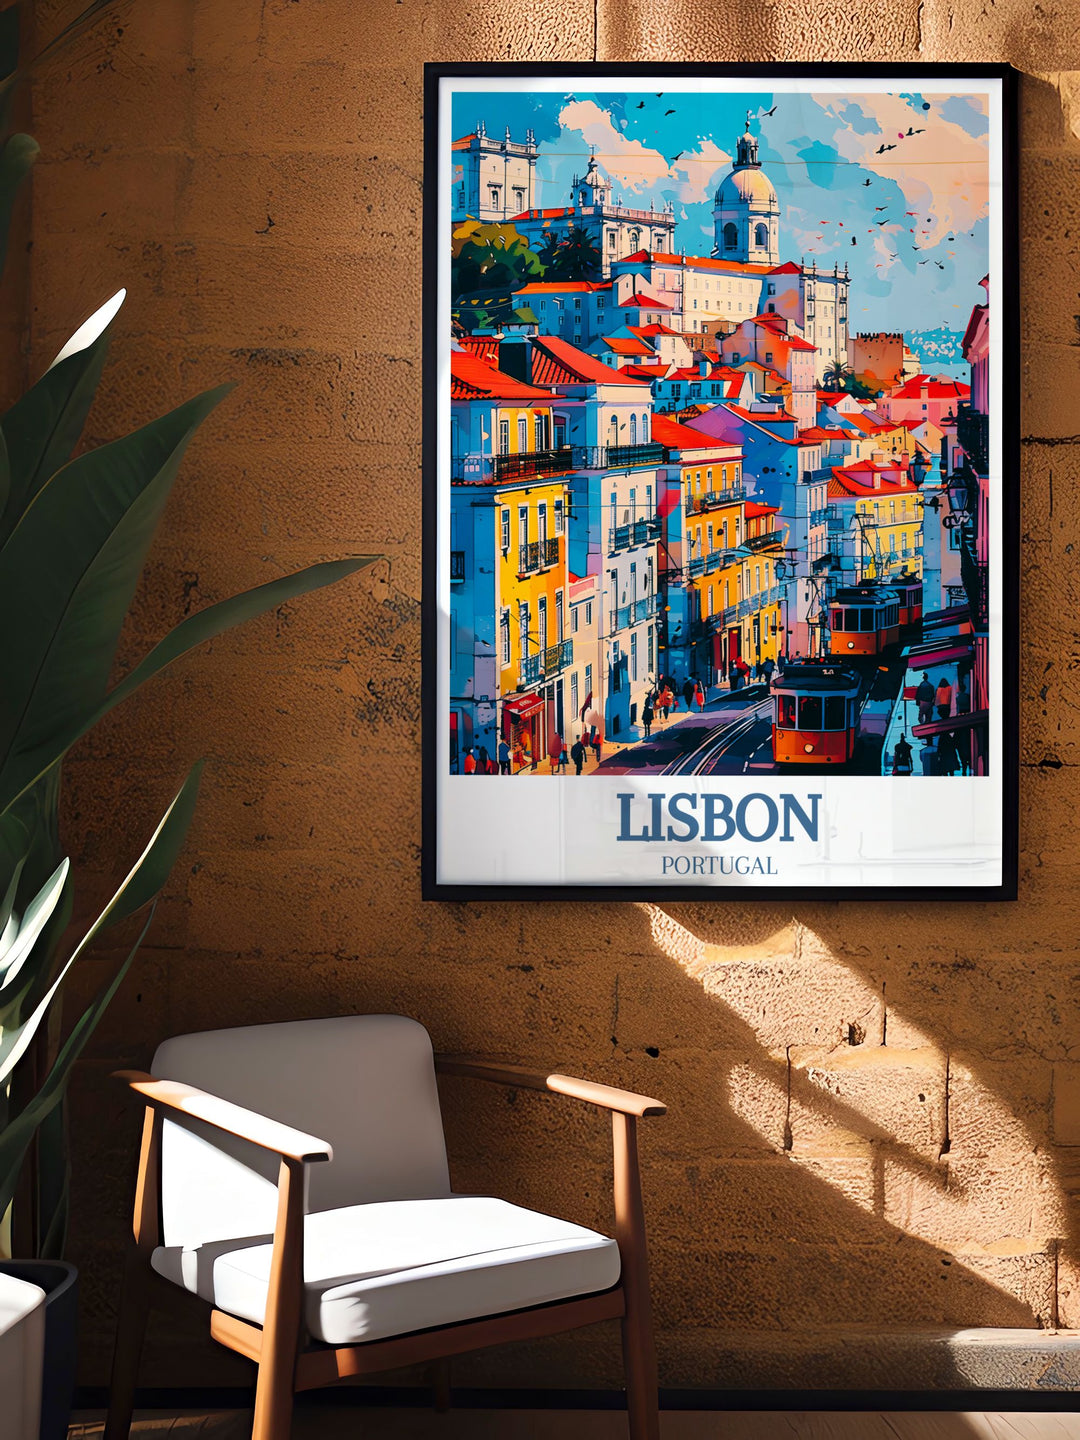 Immerse yourself in the breathtaking views of Chiado District Santa Justa Lift with our Simple Travel Print a perfect addition to your collection of Portugal Travel Art showcasing the scenic beauty of Lisbon